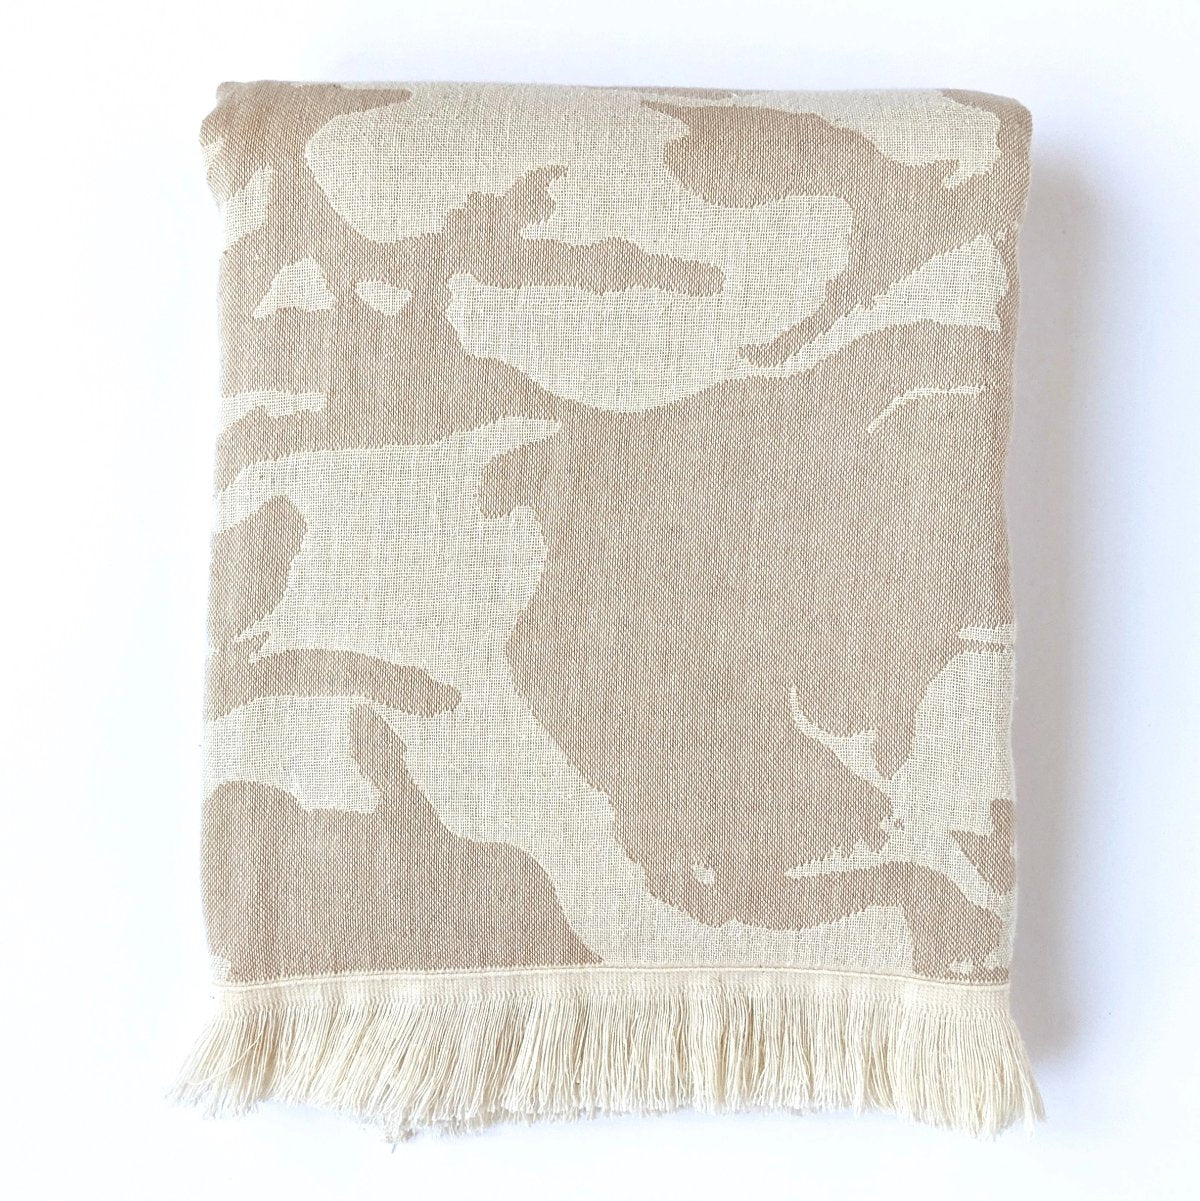 Beige Camo Camouflage Design Turkish Towel, Reversible, for Travel Beach Bath, absorbent, durable 